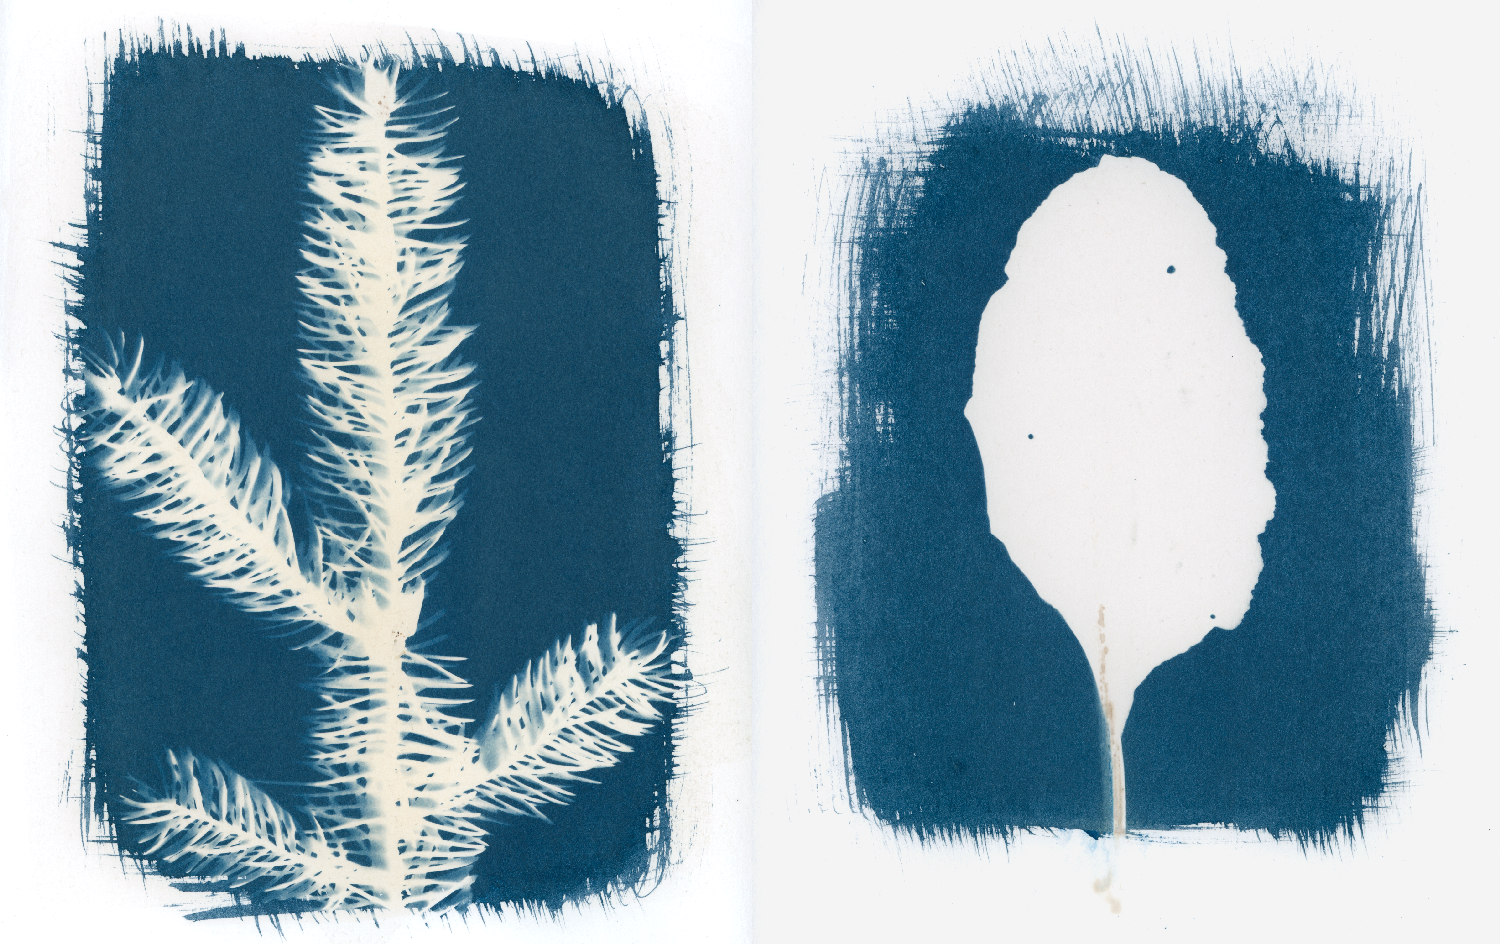 14/31: cyanotypes on strathmore, pre-coated with blue spruce and beetroot, respectively